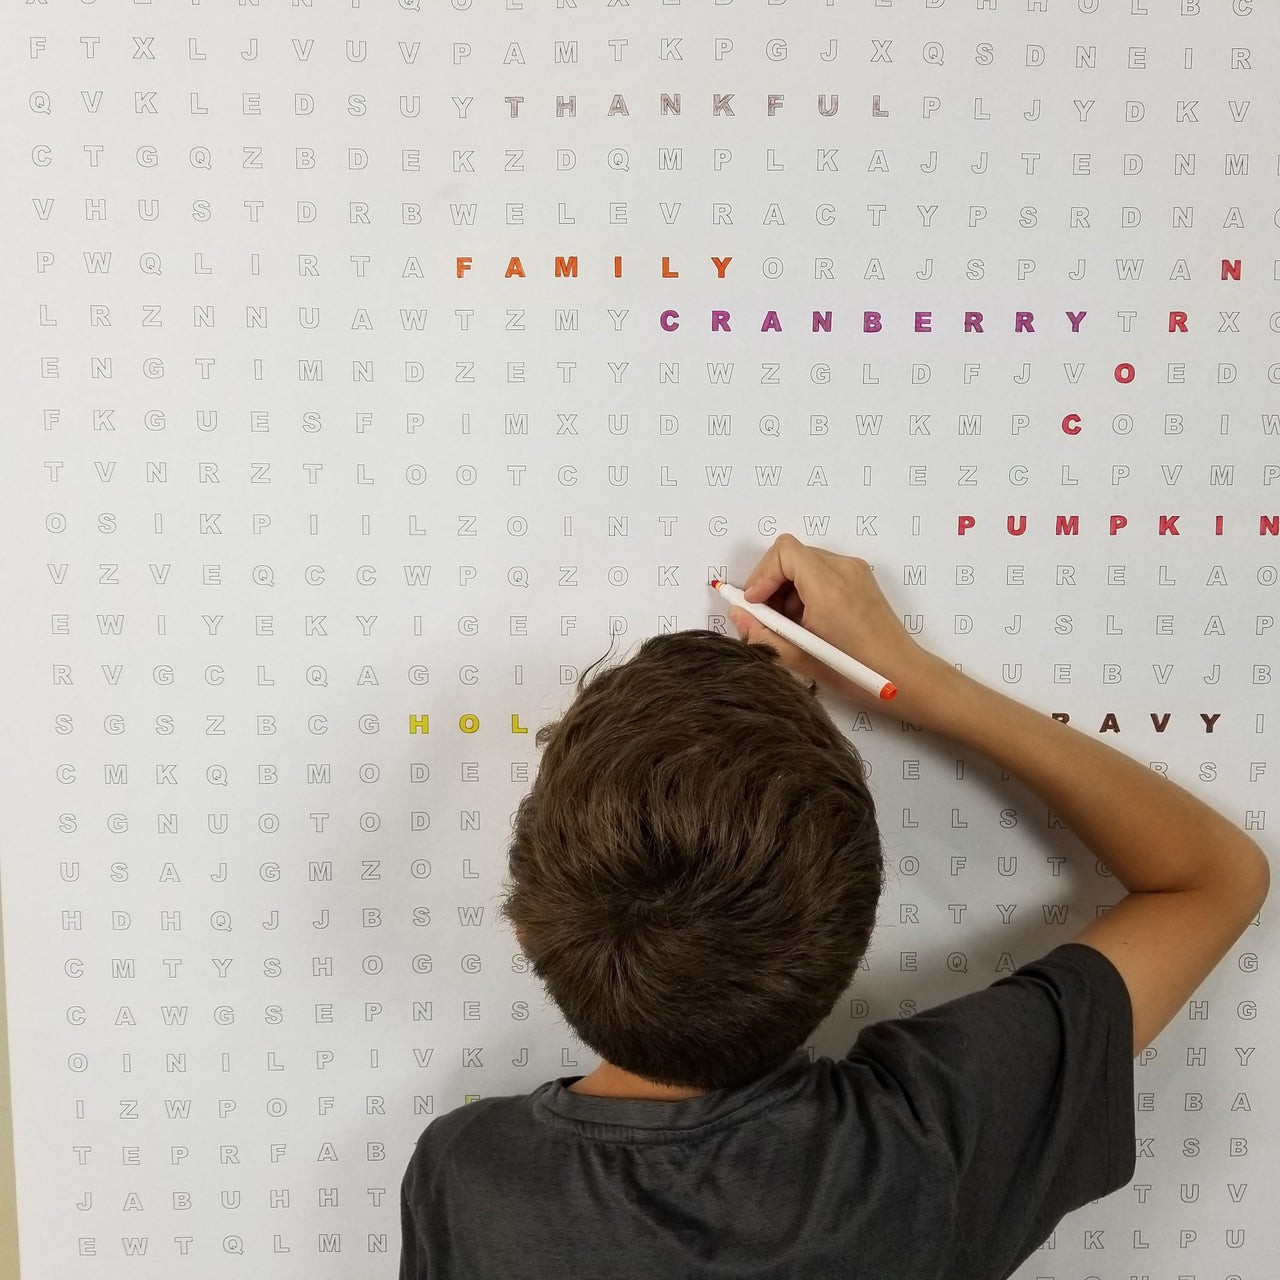 South Dakota State Giant Word Search Puzzle